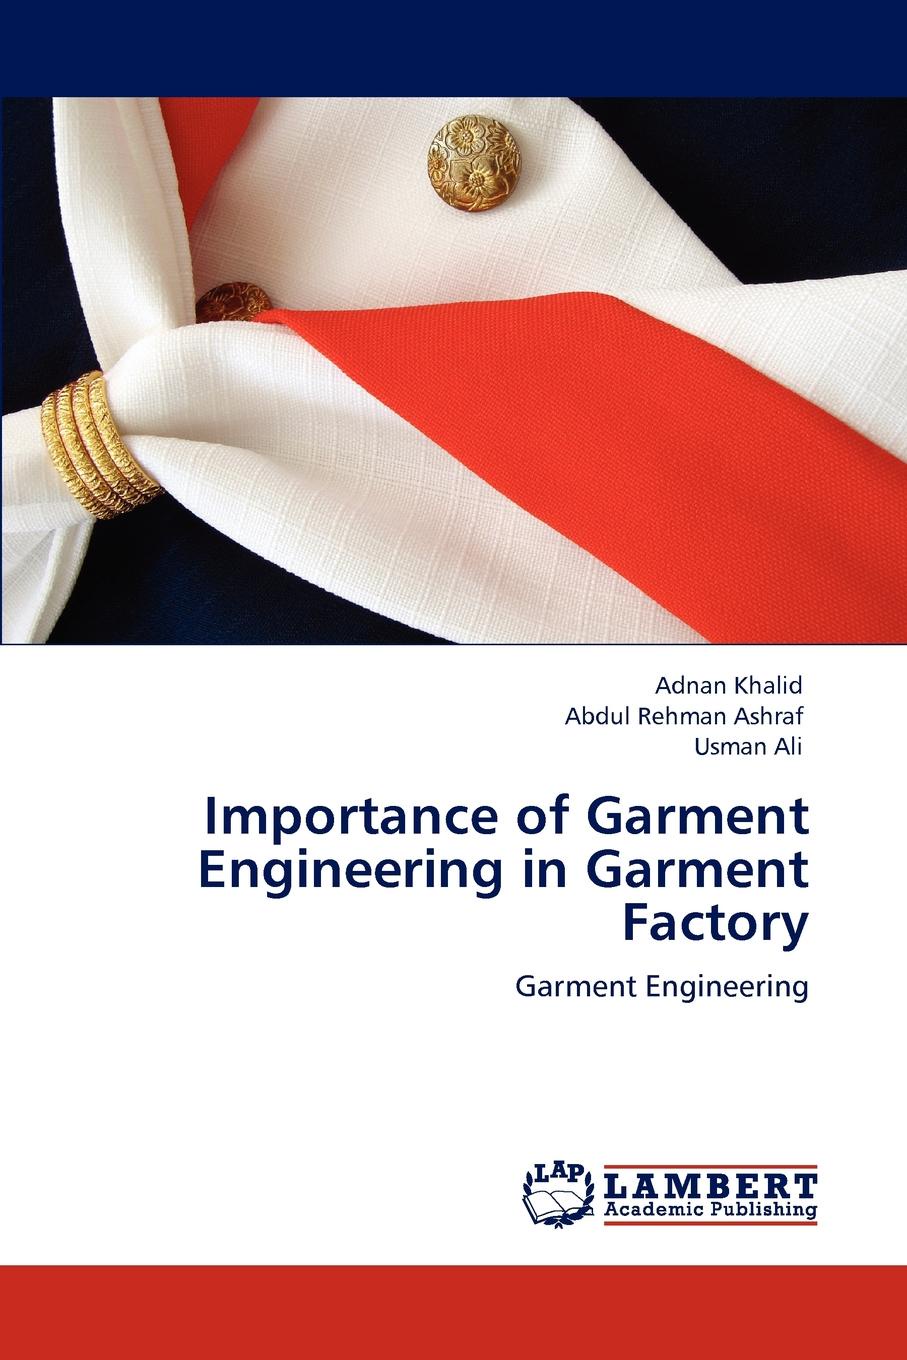 Importance of Garment Engineering in Garment Factory